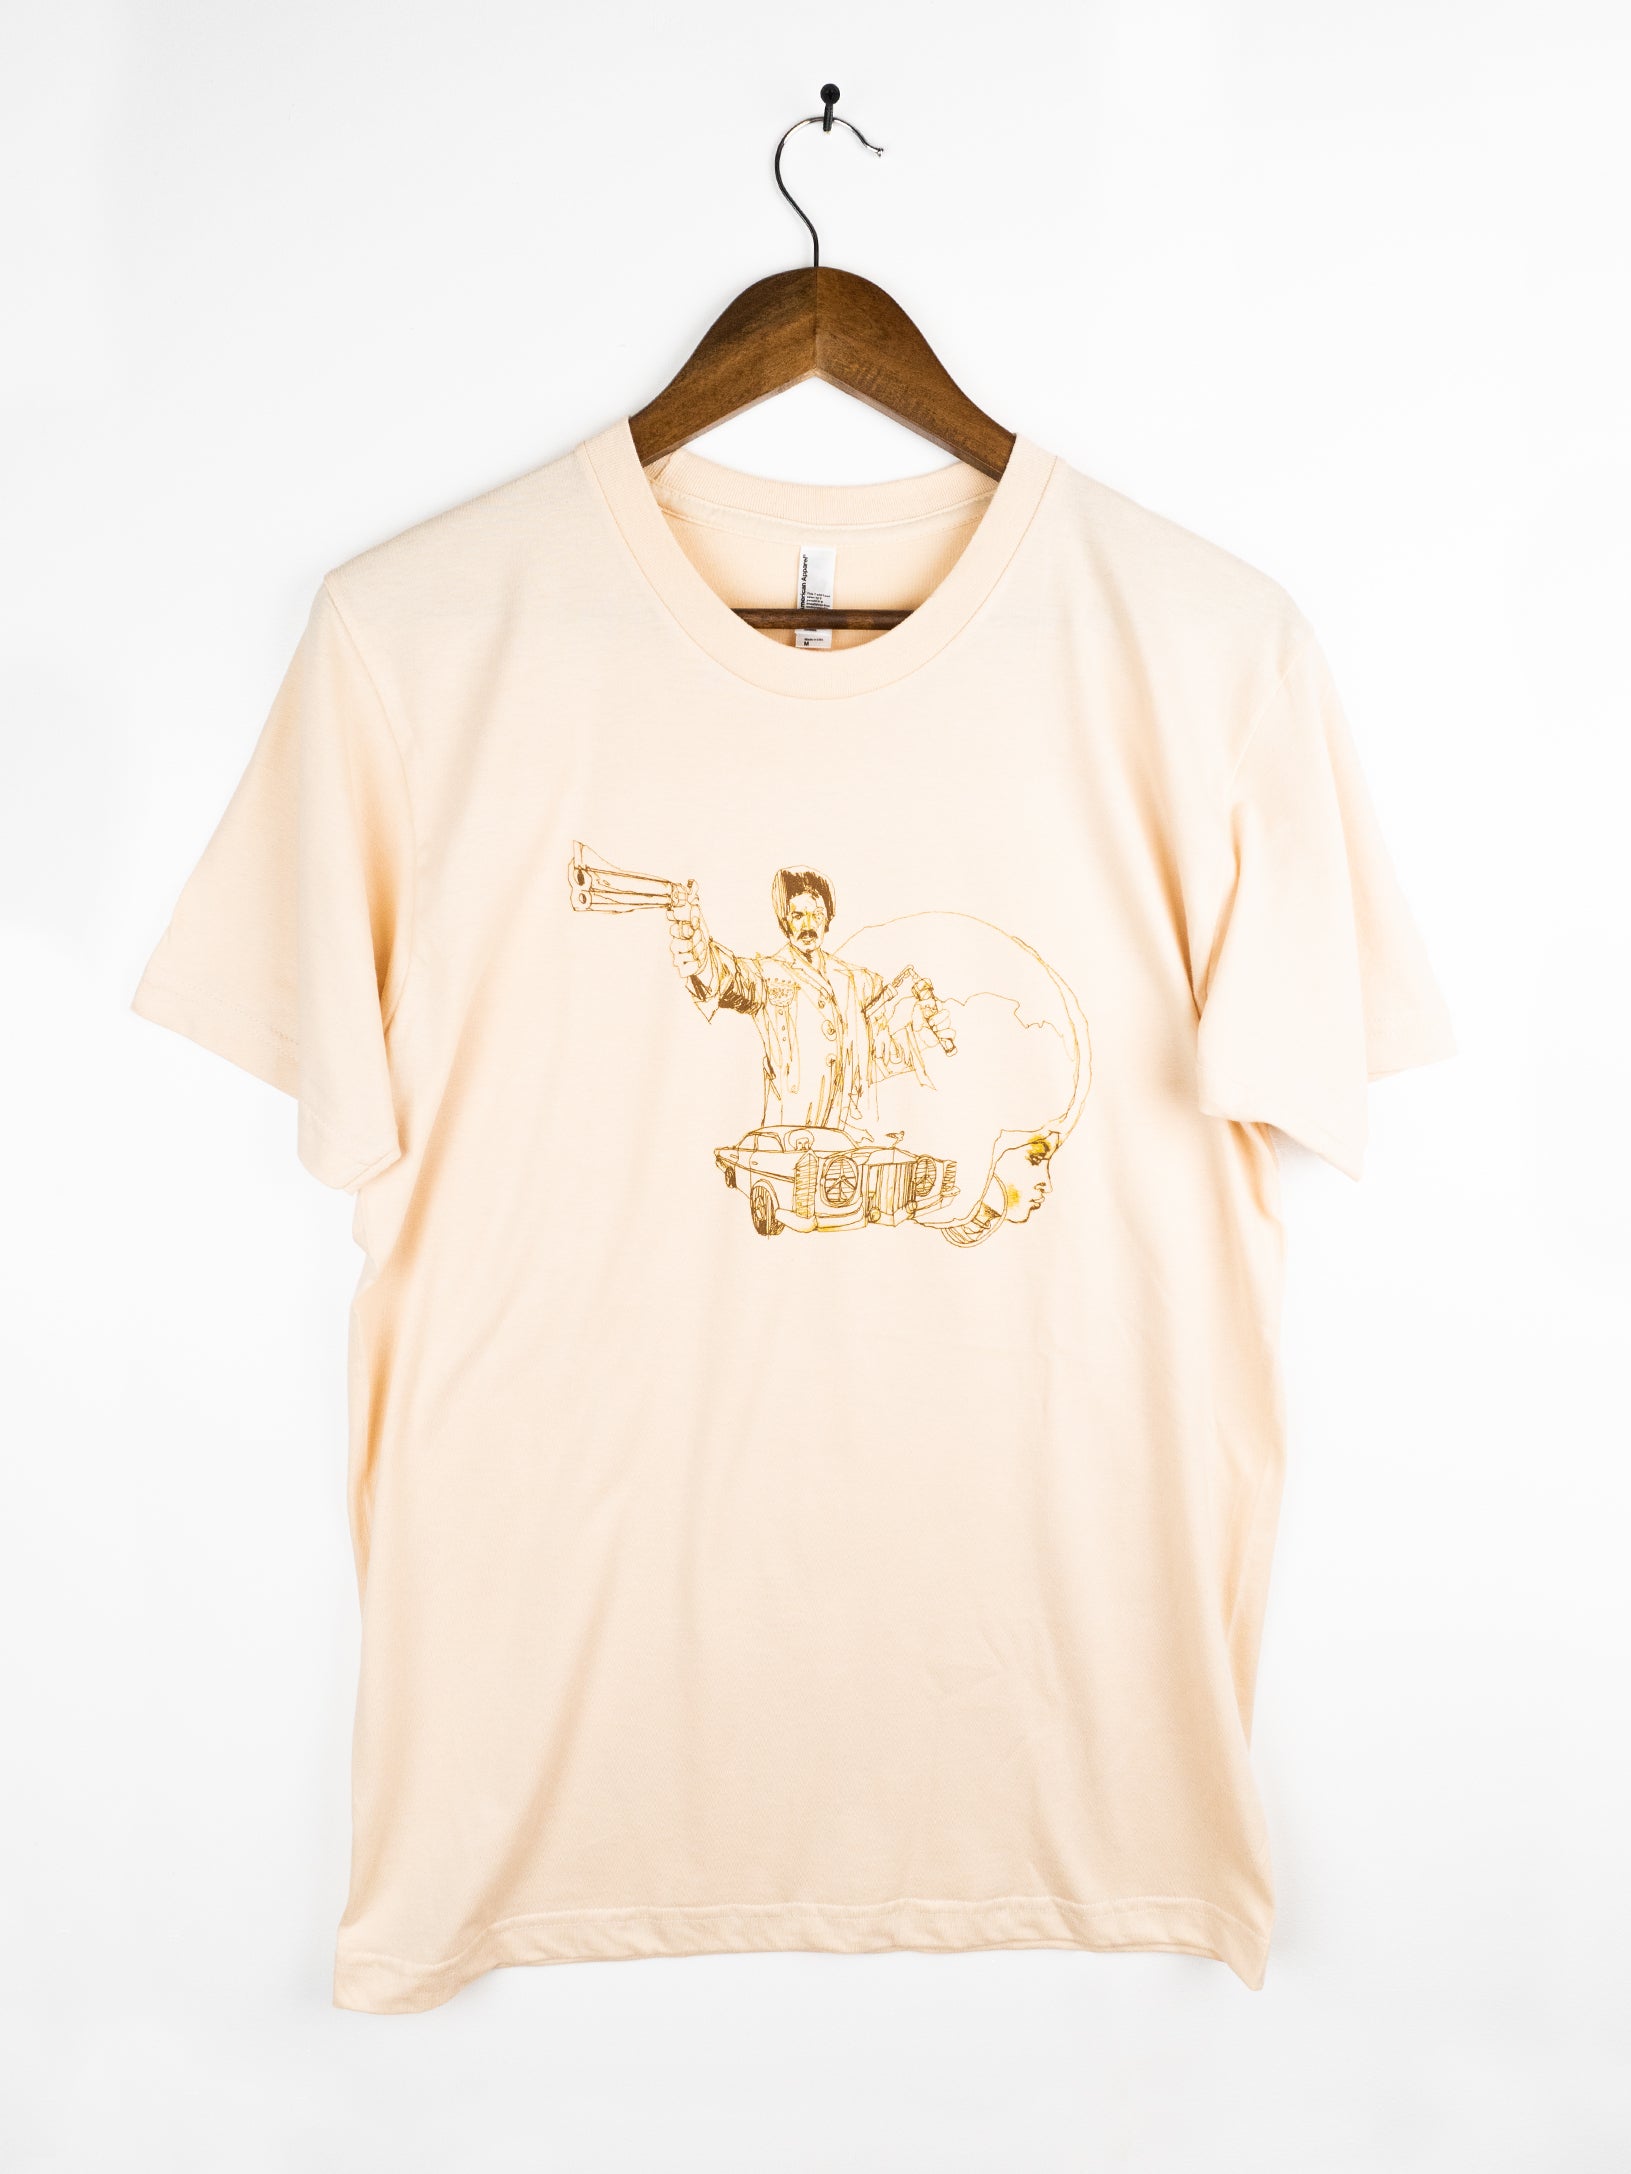 BLACK DYNAMITE! David Choe "Sketchy" Tee by Titmouse Front View